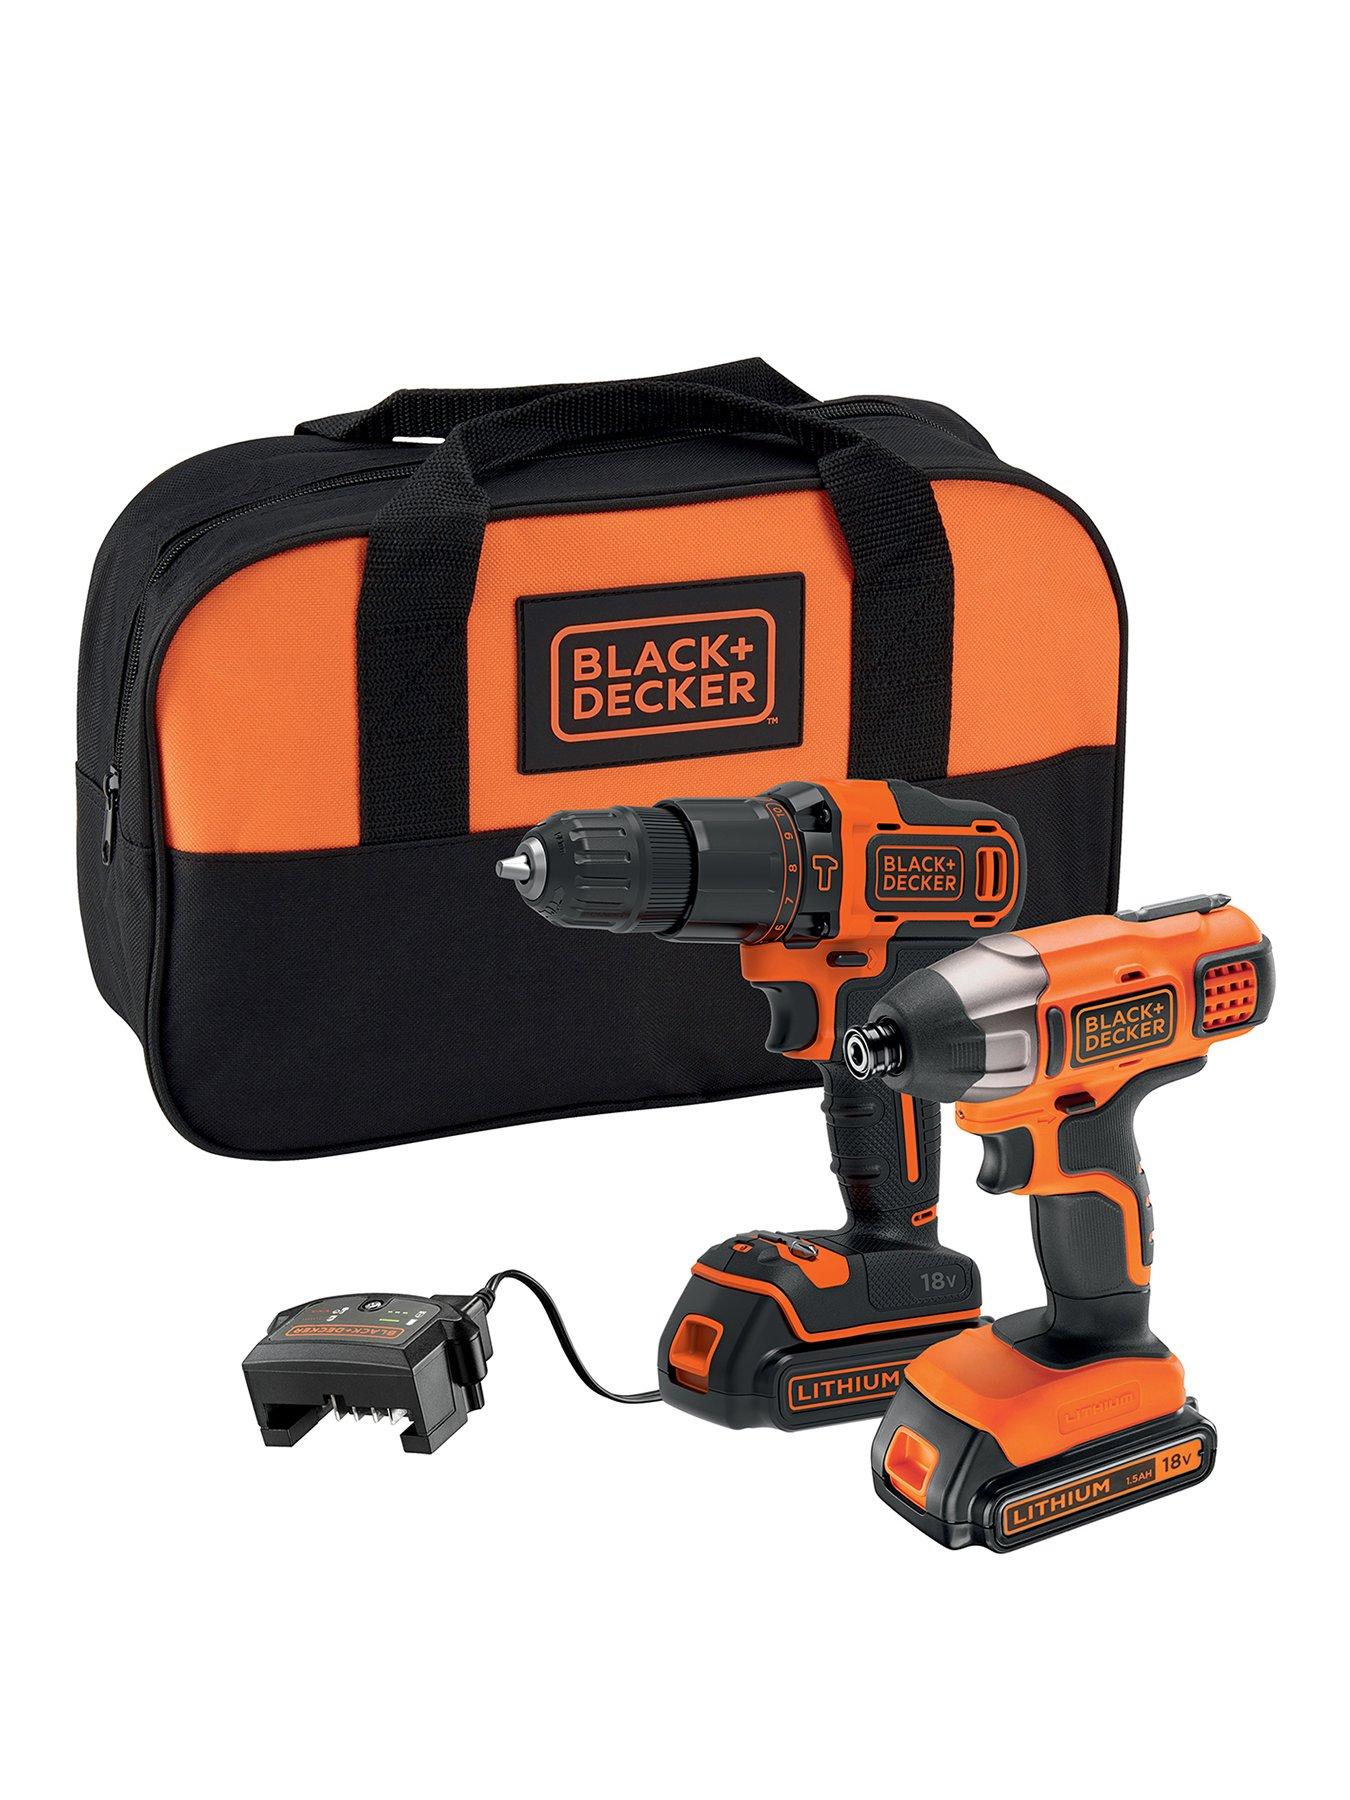 18V 2G Drill Driver + 400mA Charger + 2 Batteries + Kitbox